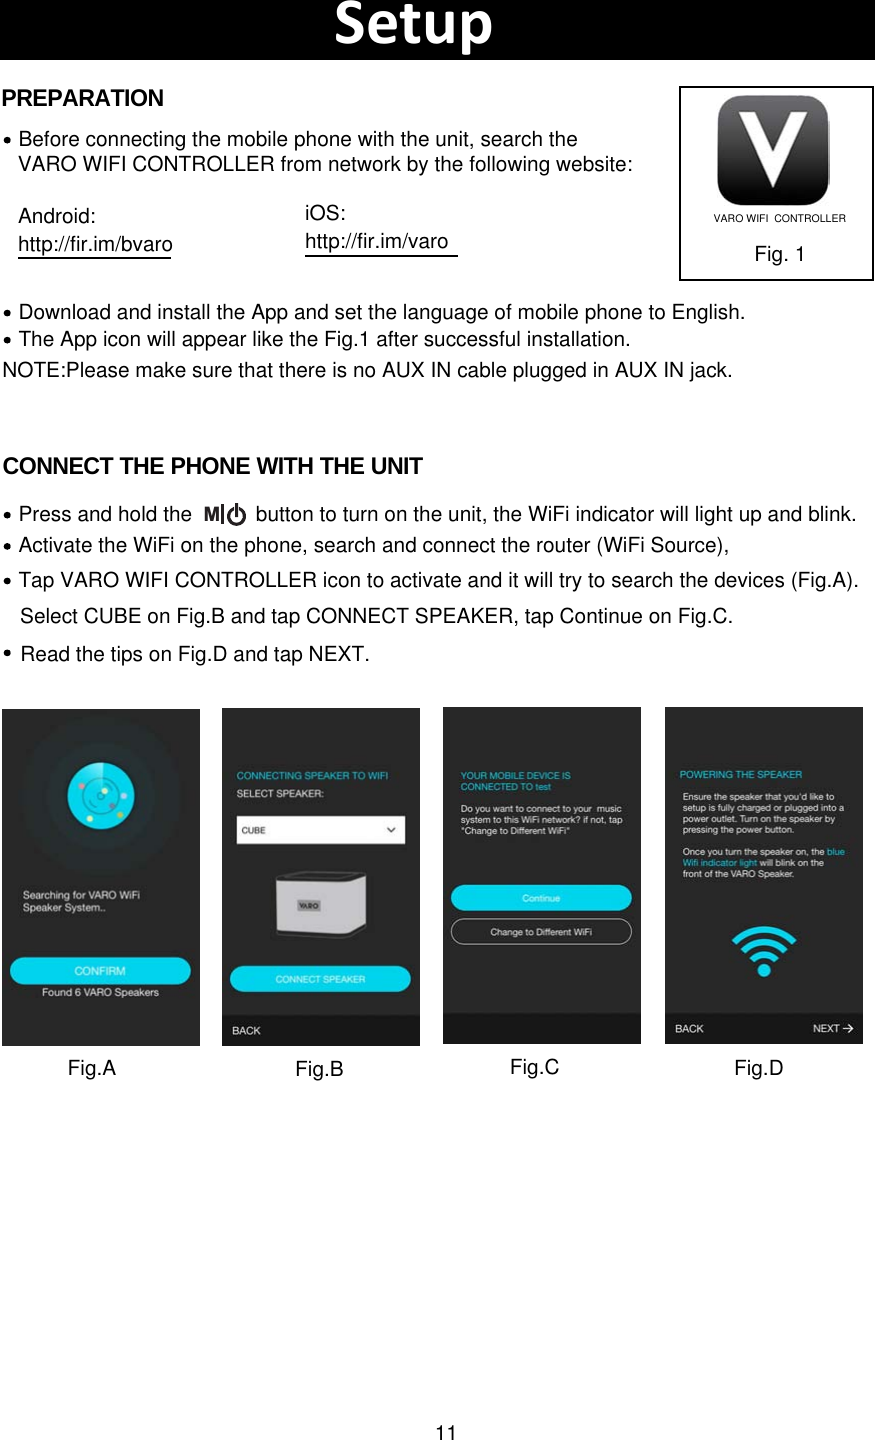 11Download and install the App and set the language of mobile phone to English.Before connecting the mobile phone with the unit, search theVARO WIFI CONTROLLER from network by the following website:The App icon will appear like the Fig.1 after successful installation.Fig. 1PREPARATIONCONNECT THE PHONE WITH THE UNITActivate the WiFi on the phone, search and connect the router (WiFi Source),  Press and hold the           button to turn on the unit, the WiFi indicator will light up and blink. Tap VARO WIFI CONTROLLER icon to activate and it will try to search the devices (Fig.A).SetupVARO WIFI  CONTROLLERNOTE:Please make sure that there is no AUX IN cable plugged in AUX IN jack.MAndroid:http://fir.im/bvaroiOS:http://fir.im/varoFig.A Fig.BSelect CUBE on Fig.B and tap CONNECT SPEAKER, tap Continue on Fig.C. Fig.C Fig.DRead the tips on Fig.D and tap NEXT.